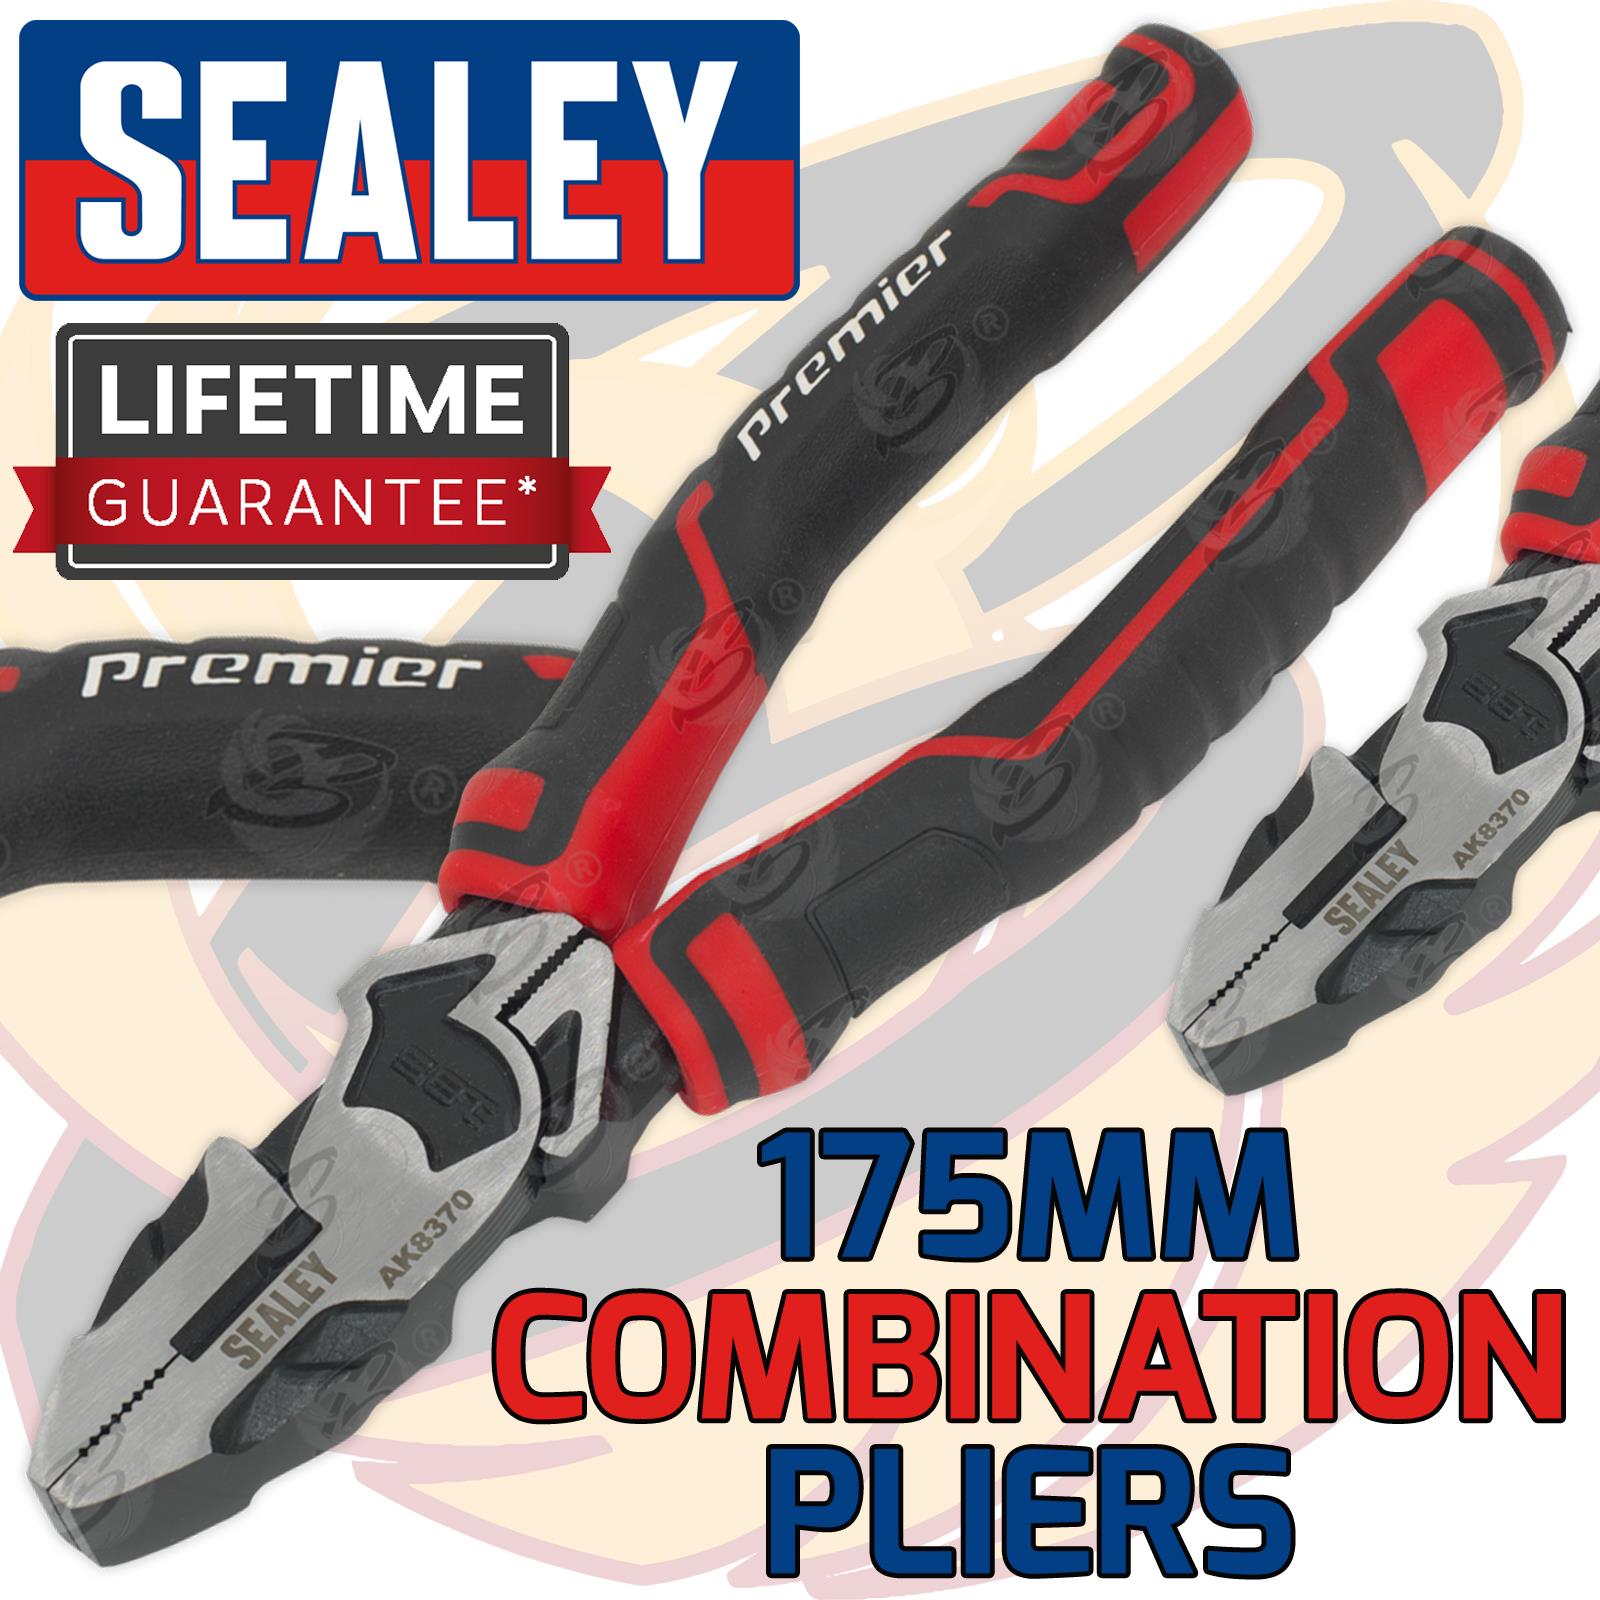 SEALEY HIGH LEVERAGE 175MM COMBINATION PLIERS